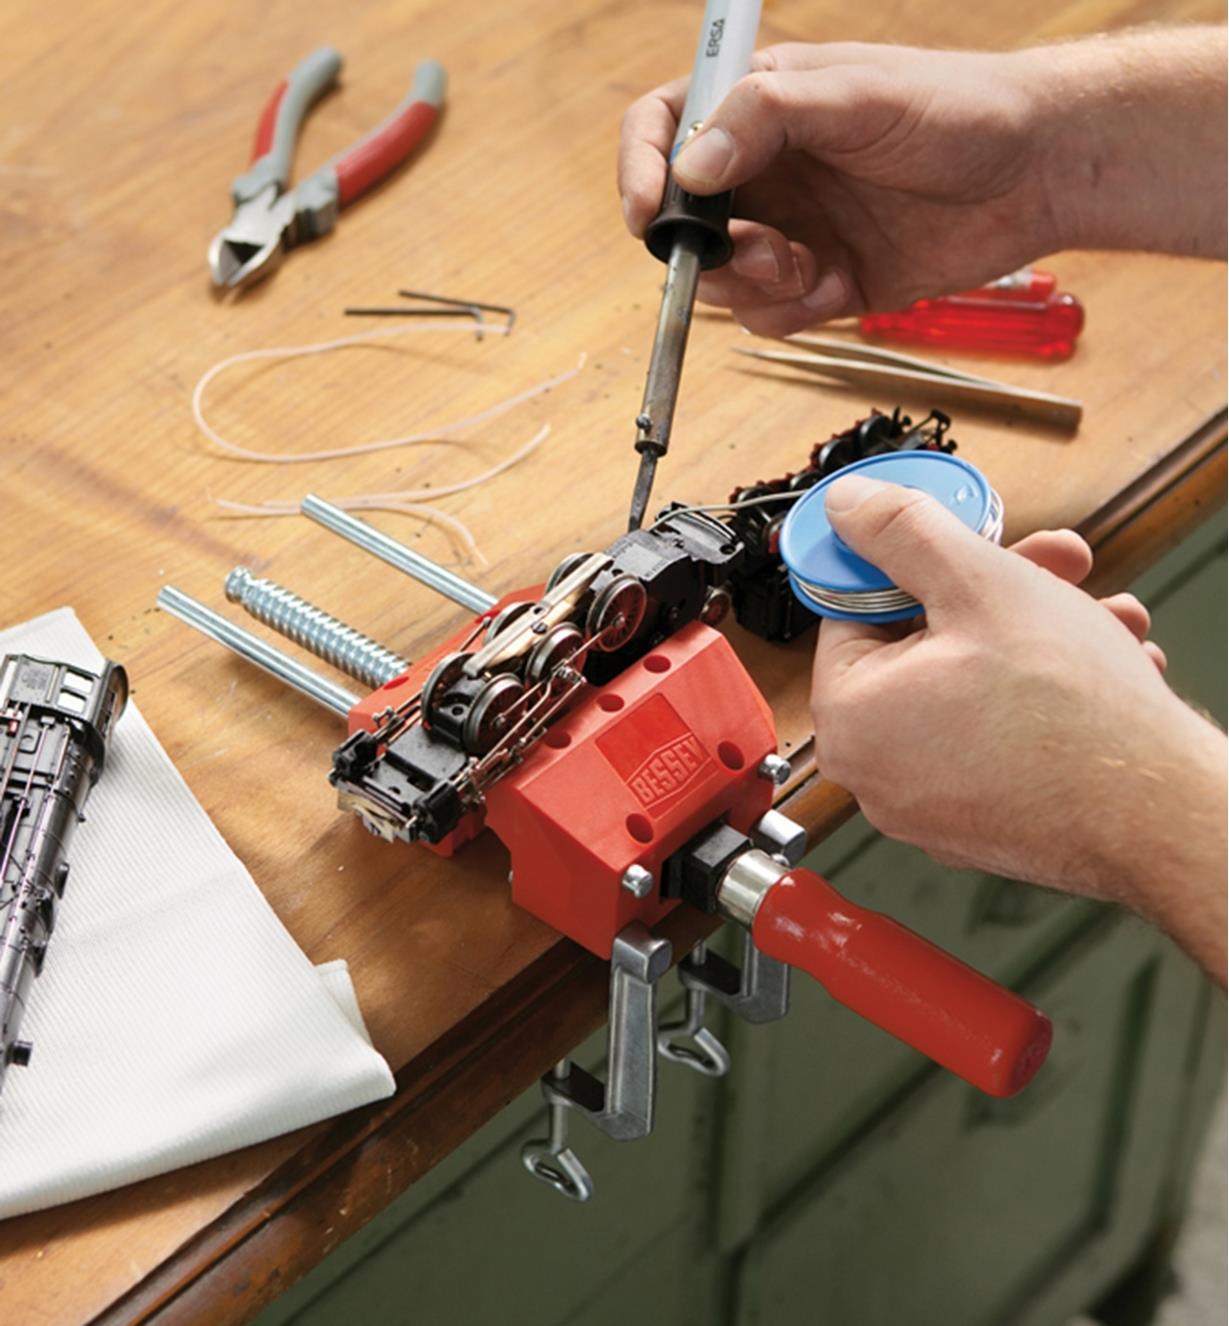 A Bessey portable hobby vise mounted to a table top, holding a model train being repaired